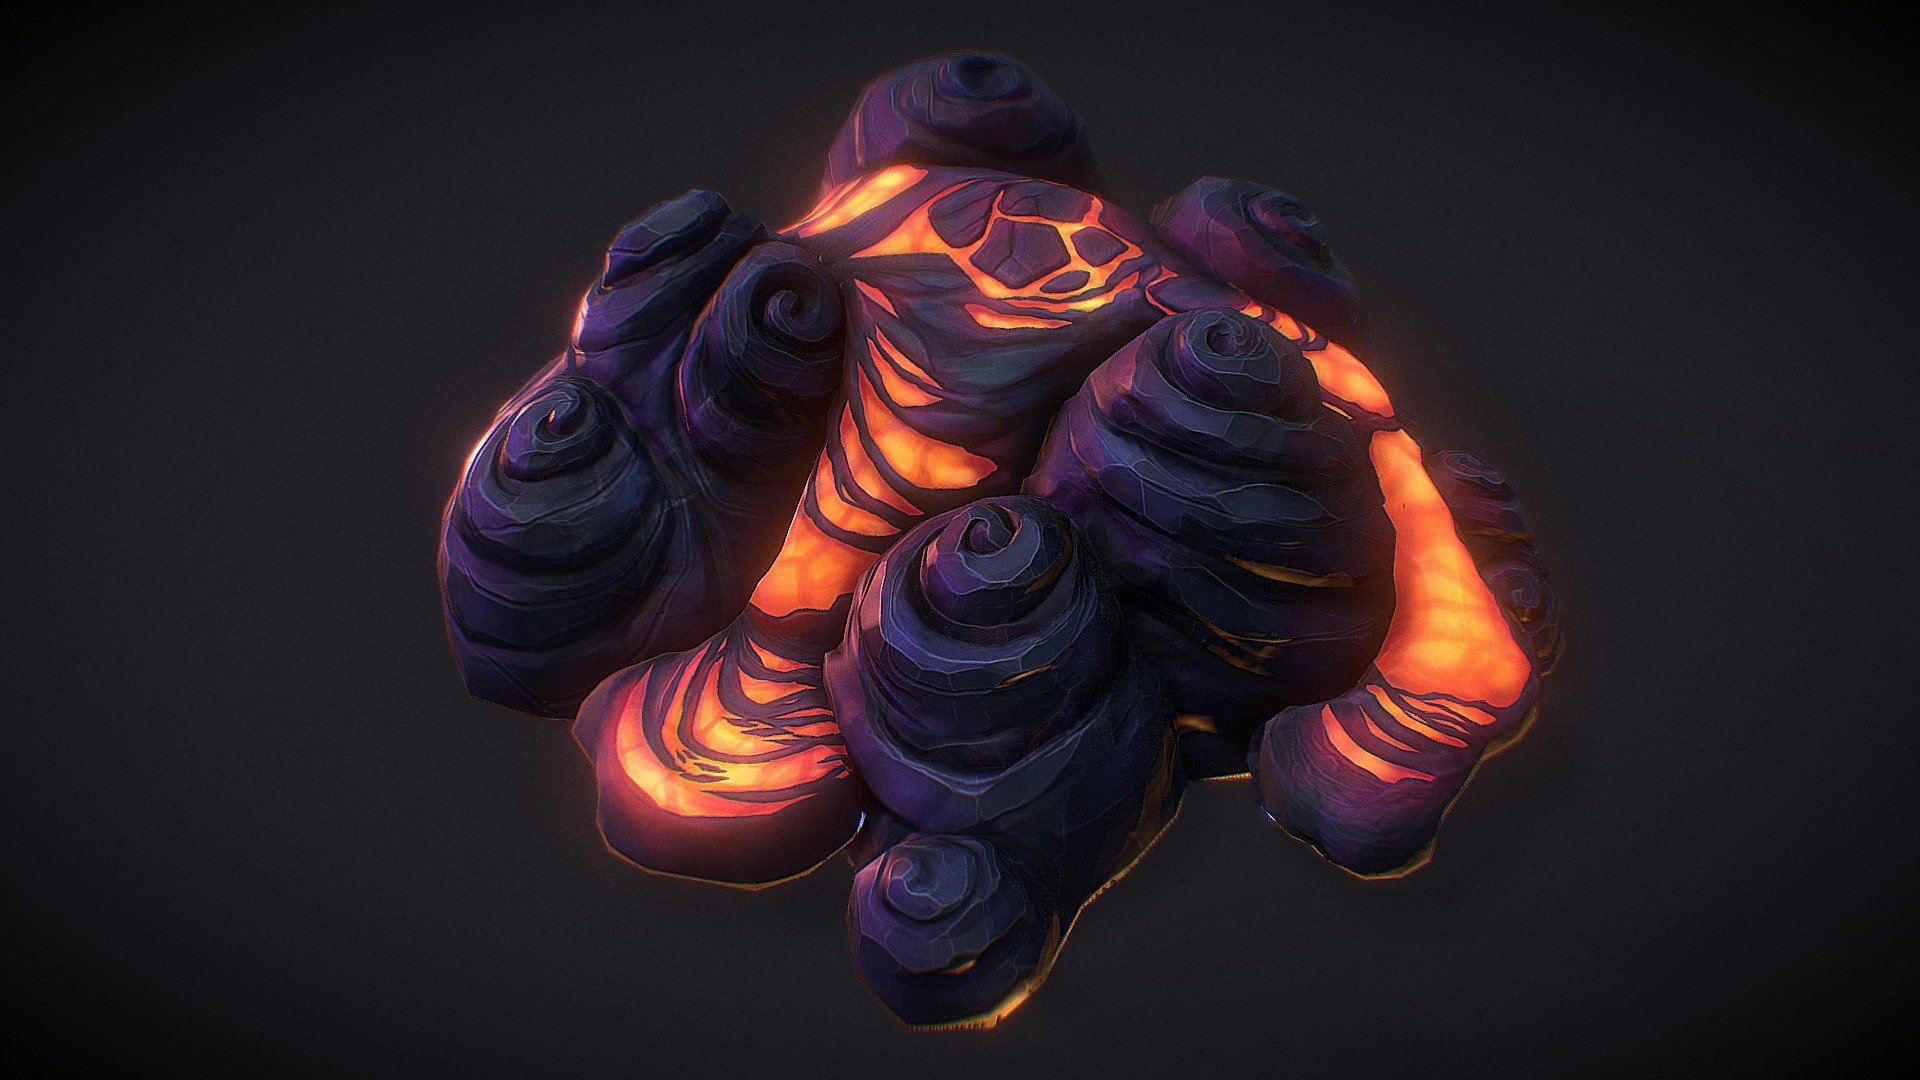 A little sculpting practice, a small diorama of some chunky stylized lava and rocks. Made in Maya, Zbrush and 3DCoat

twitter:https://twitter.com/rosiejarvisart

Artstation: https://www.artstation.com/rosiejarvis - Chunky stylized lava rocks - 3D model by rosiejarvis 3d model